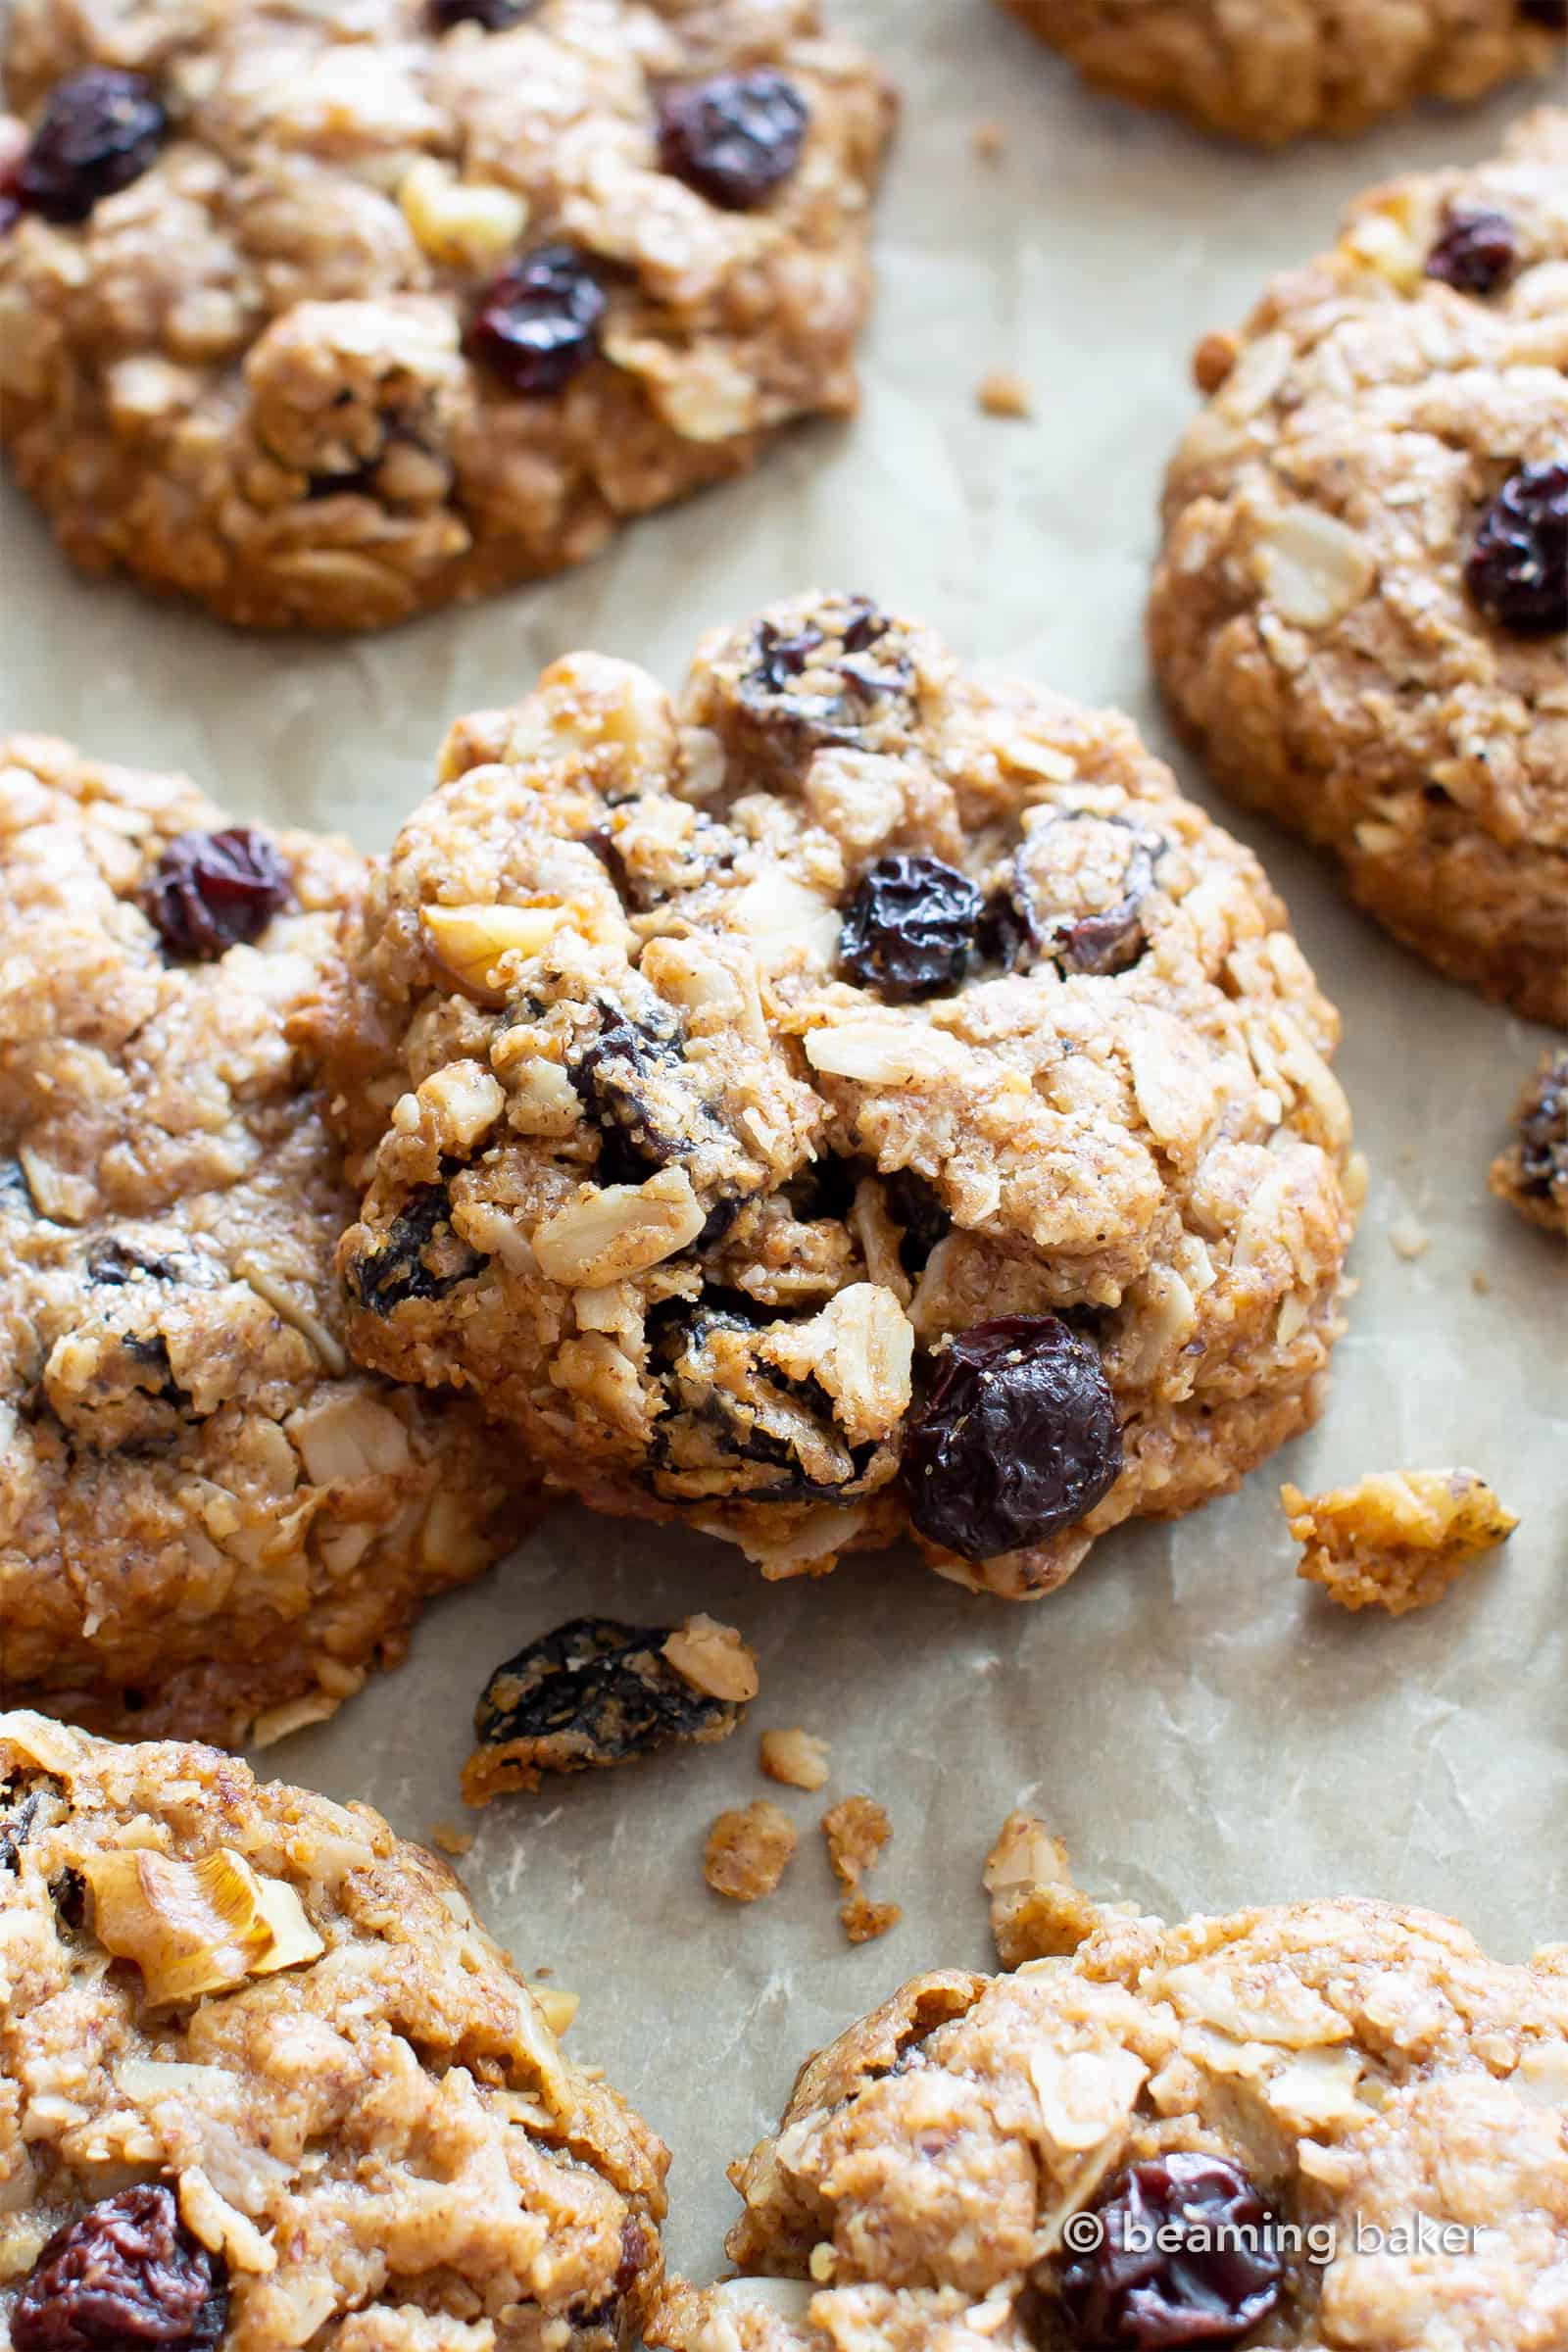 The BEST VEGAN chewy oatmeal raisin cookies EVER--crispy edges with a CHEWY center, bursting with oats, warm spices & juicy raisins! Gluten-Free, Healthy Ingredients! #Vegan #Cookies #OatmealRaisin #GlutenFree | Recipe at BeamingBaker.com